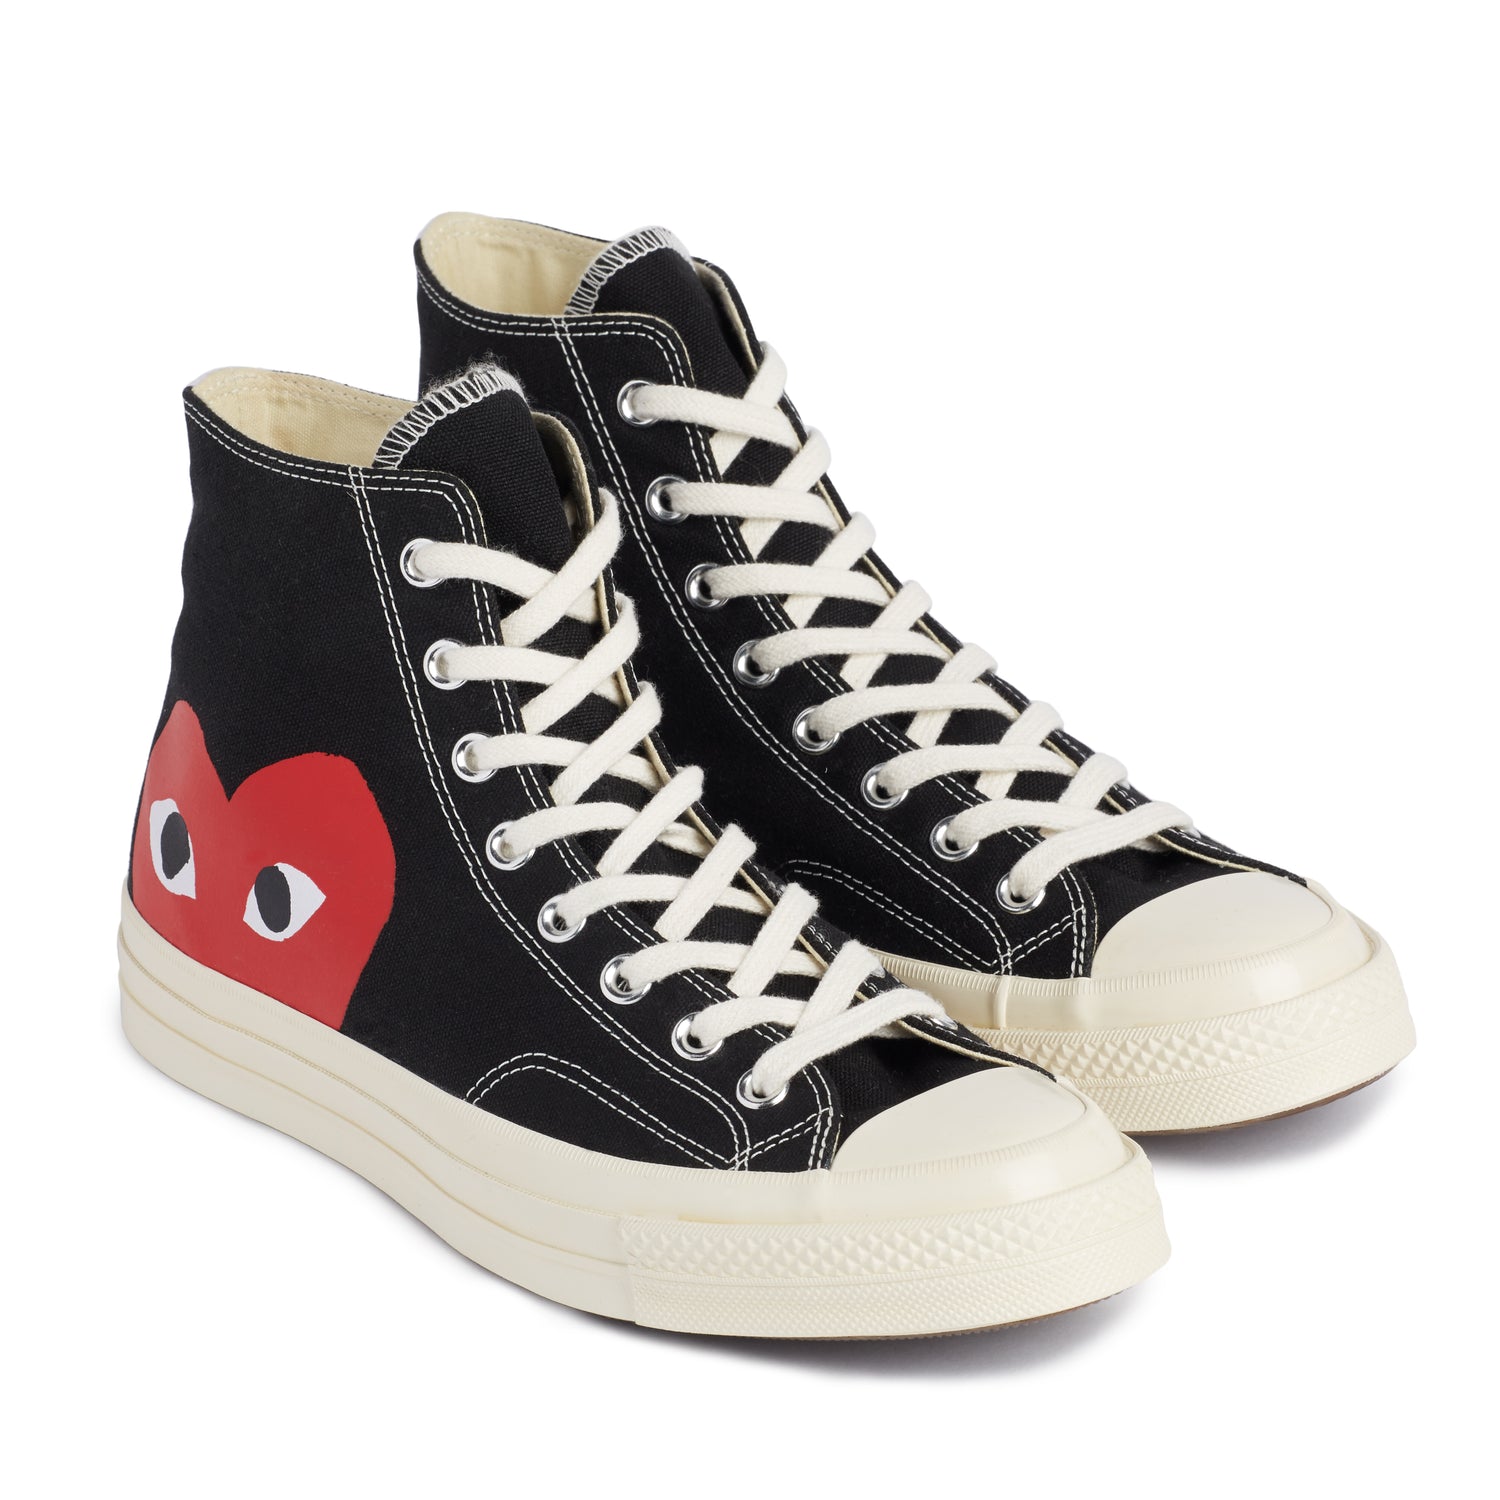 Play Converse: Red Heart Chuck Taylor All Star ’70 High Sneakers (Black ...